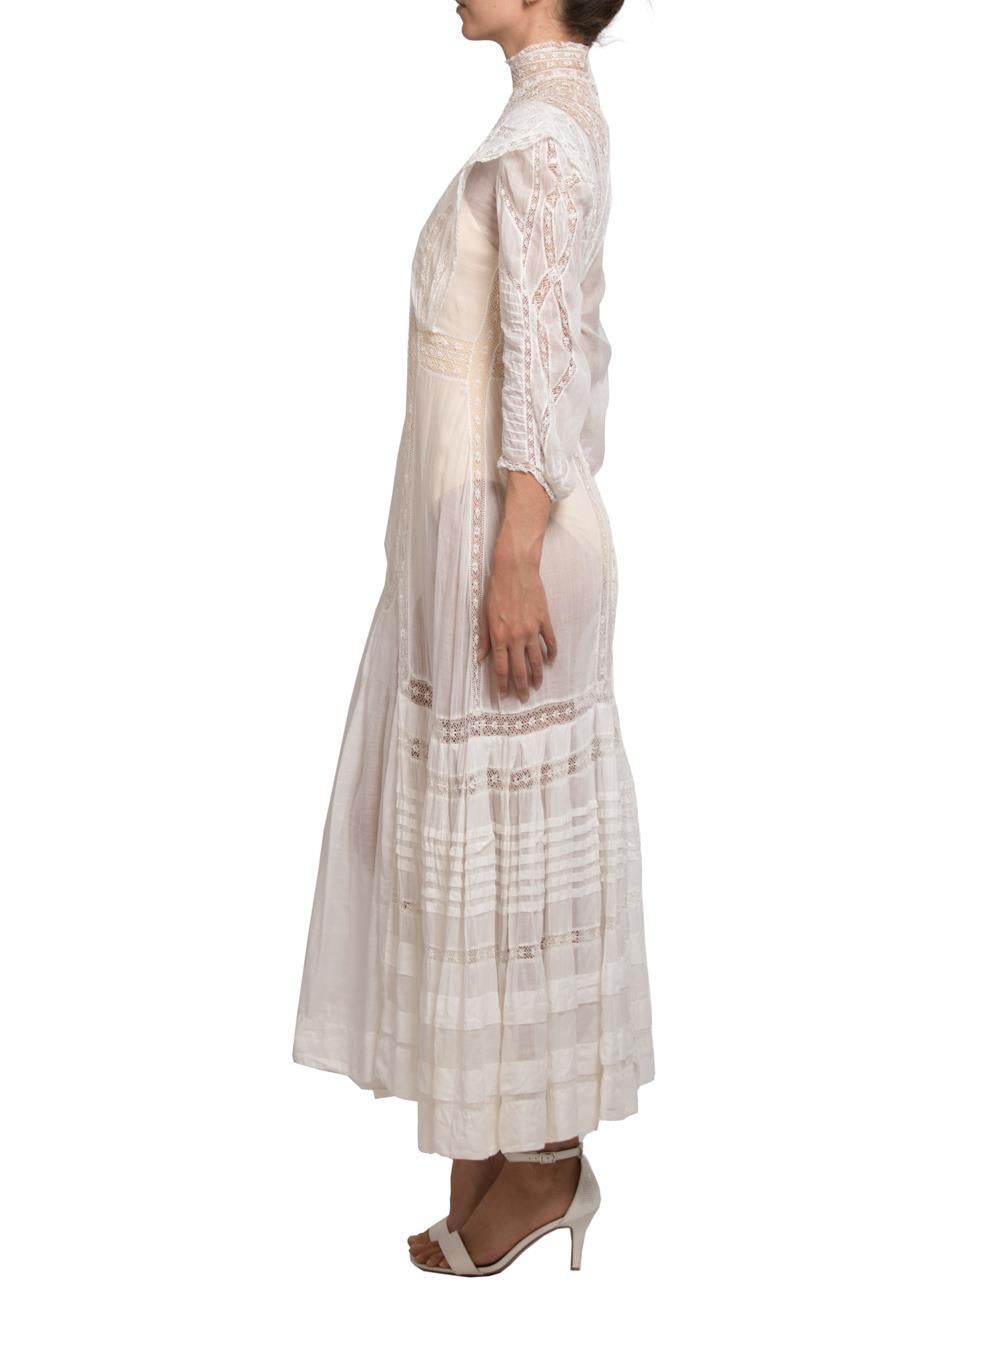 Victorian Cream Organic Cotton Voile & Lace Long Sleeved Dress In Excellent Condition For Sale In New York, NY